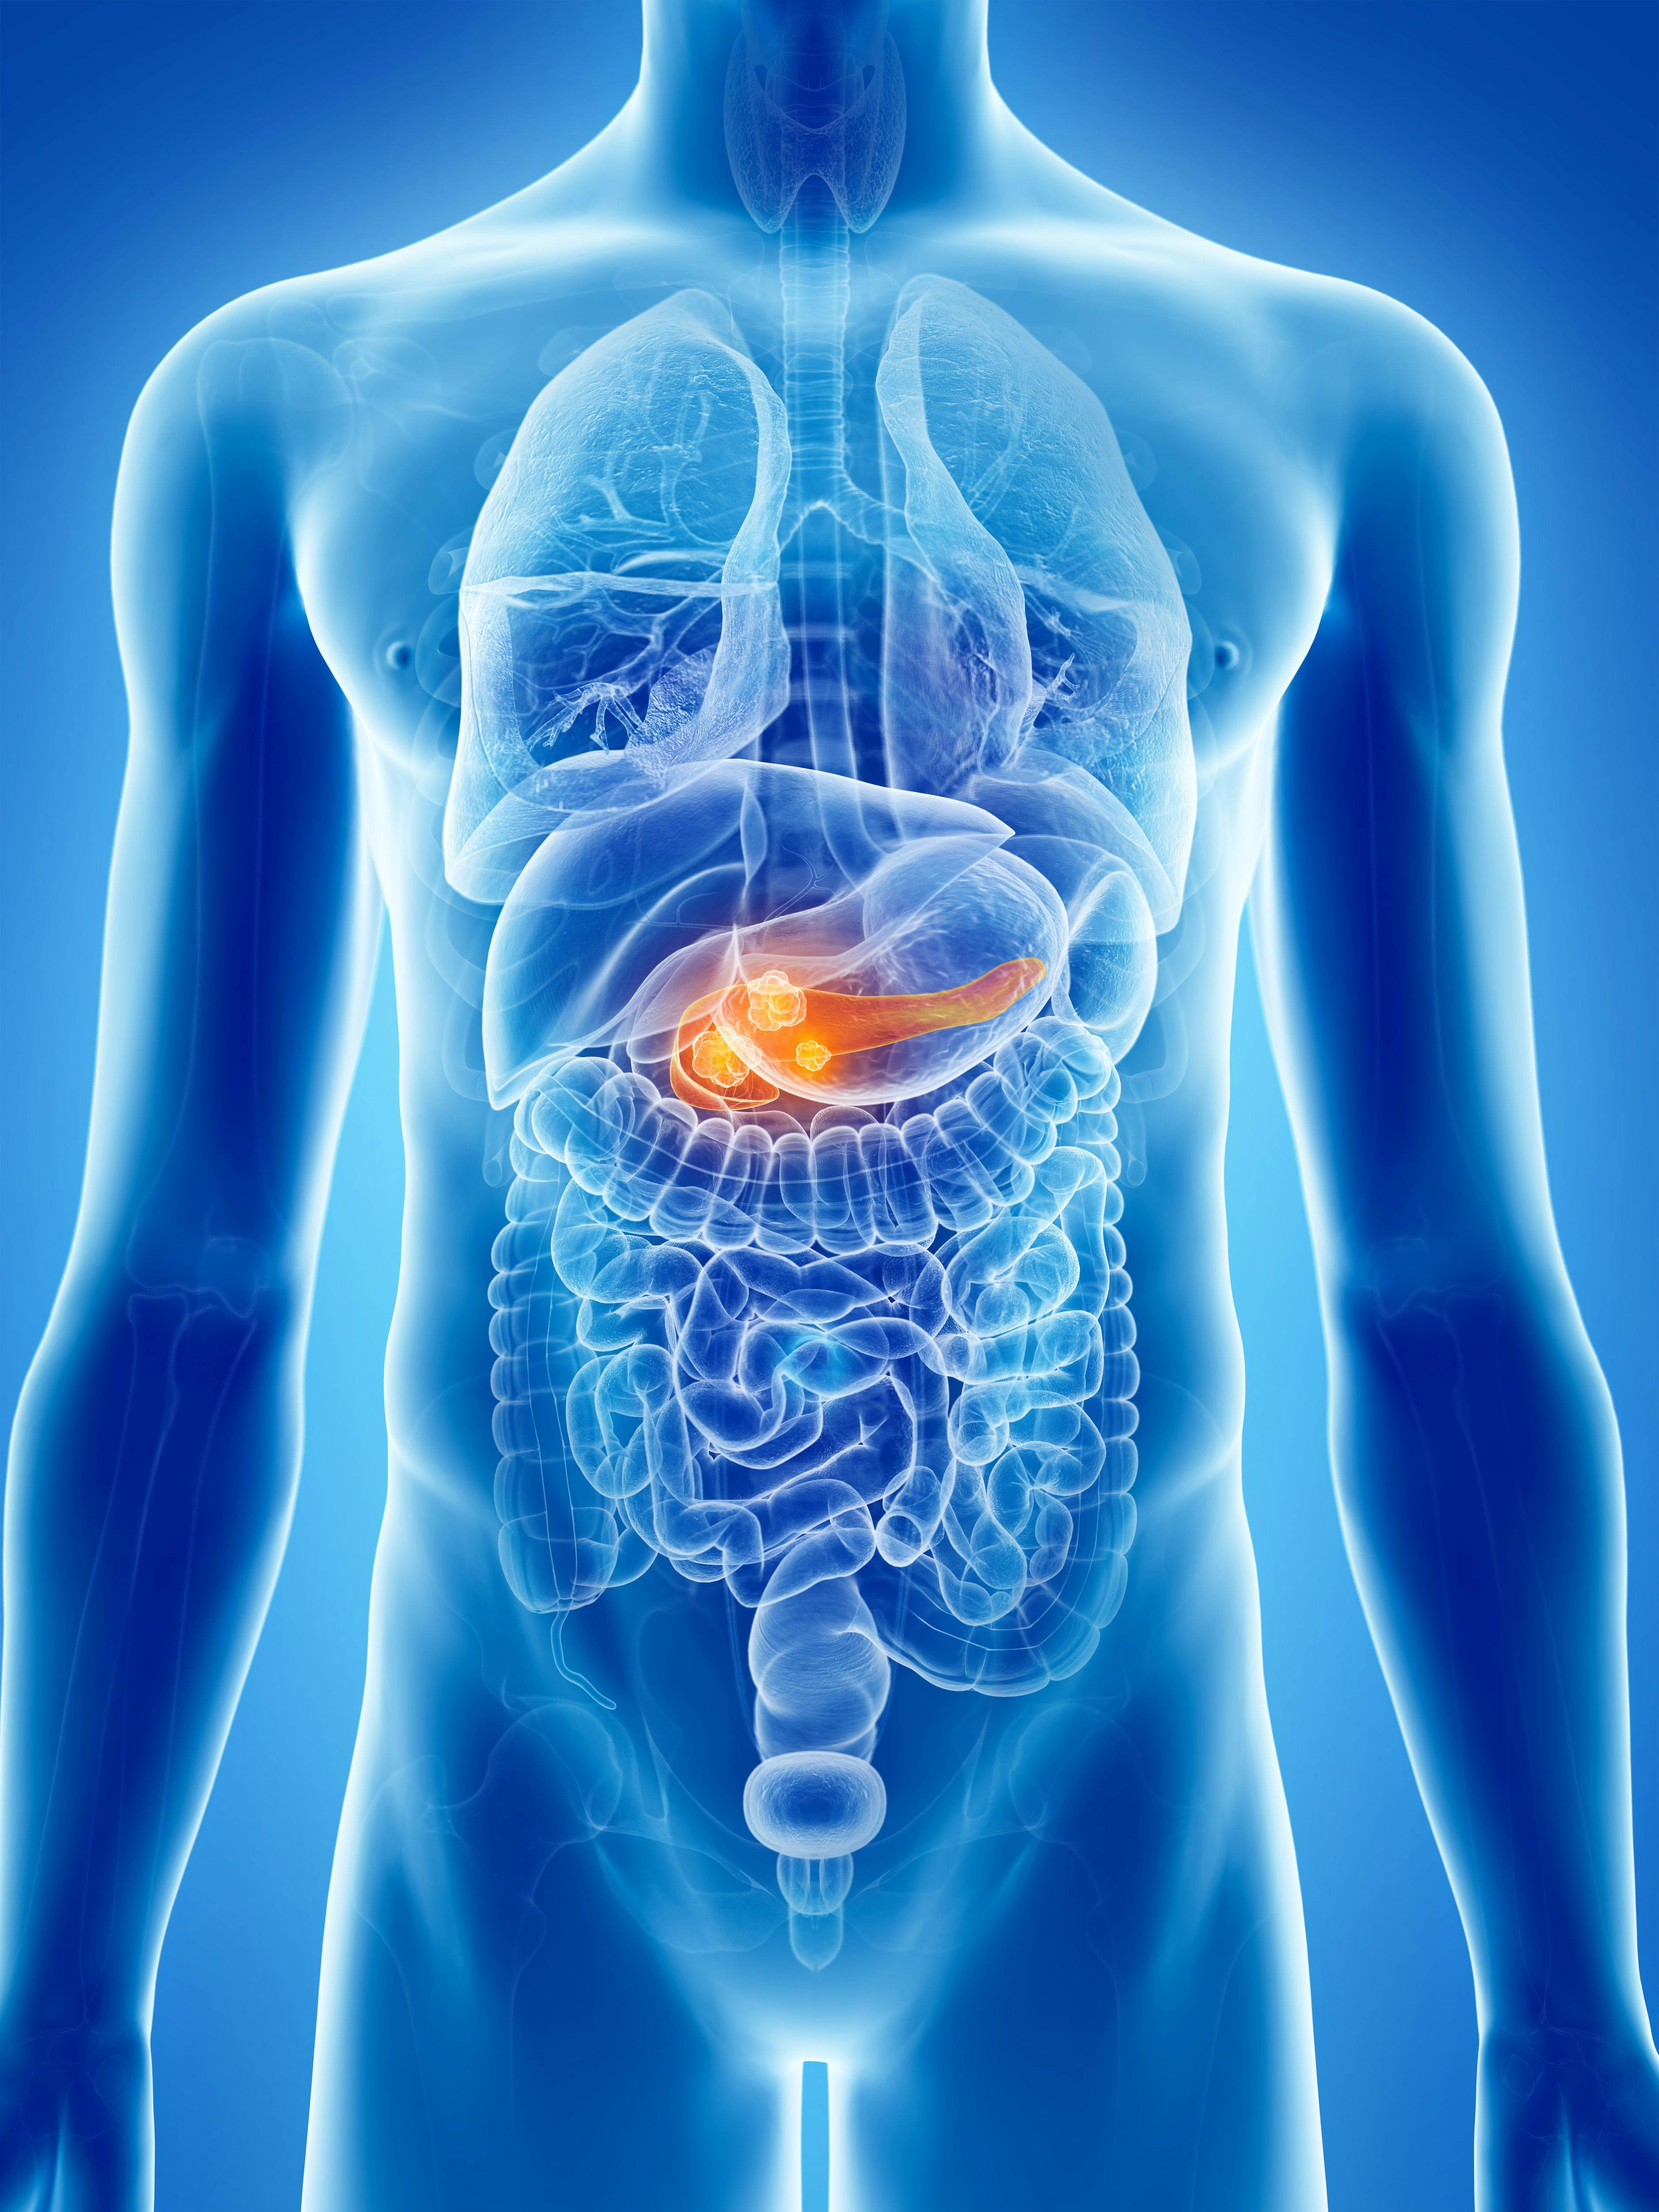 Davendra Sohal, MD, MPH, Discusses Major Takeaways From Key Research in Pancreatic Cancer